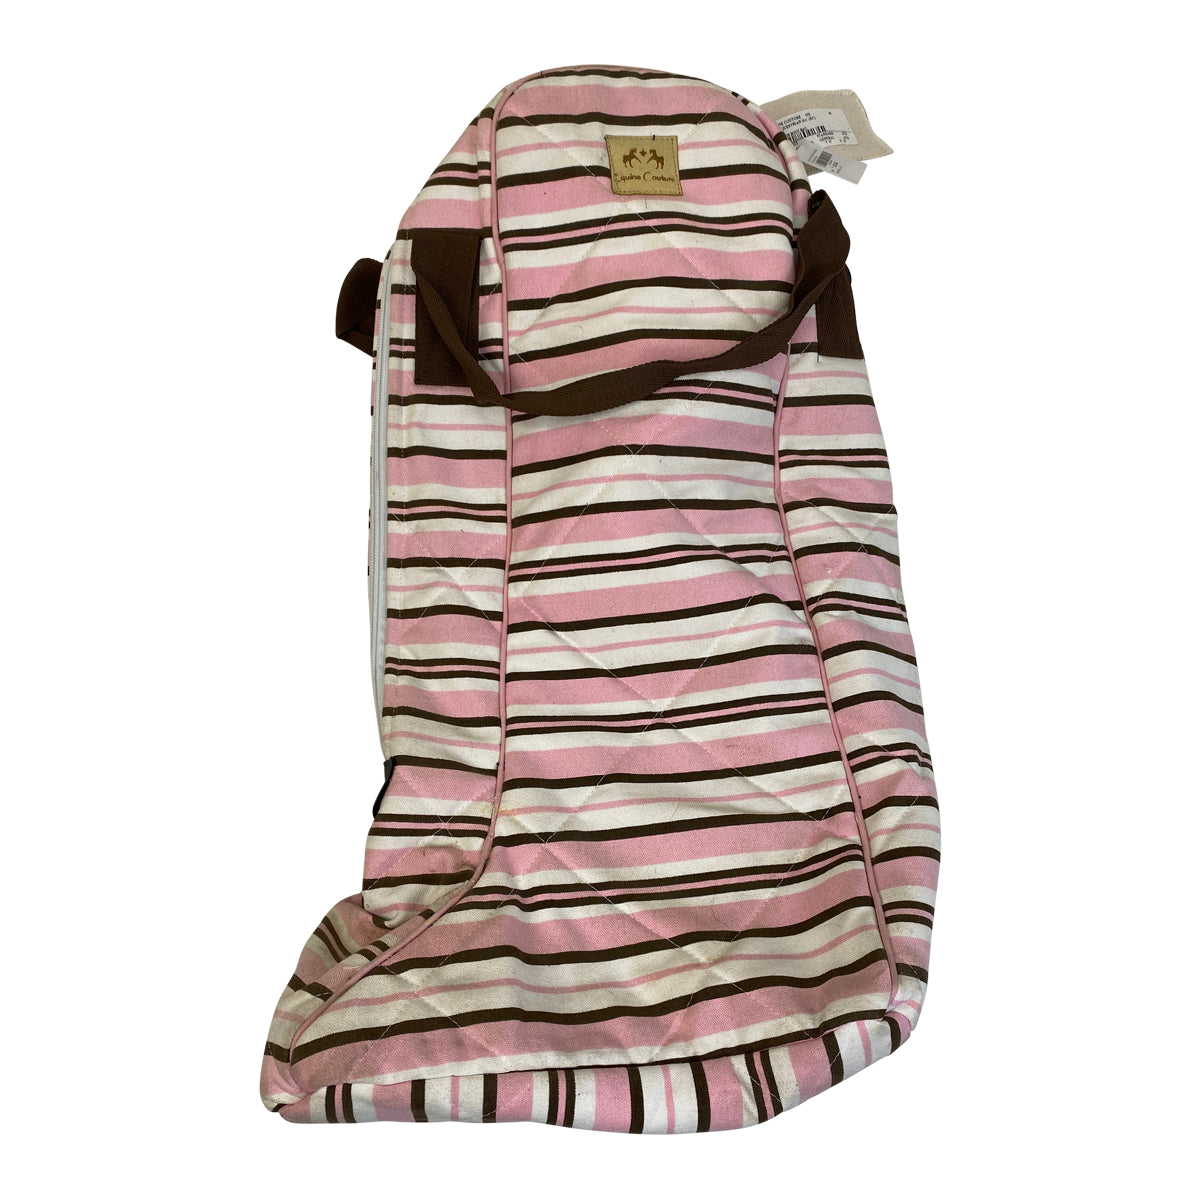 Equine Couture 'Madison' Boot Bag in Pink/Chocolate Stripes